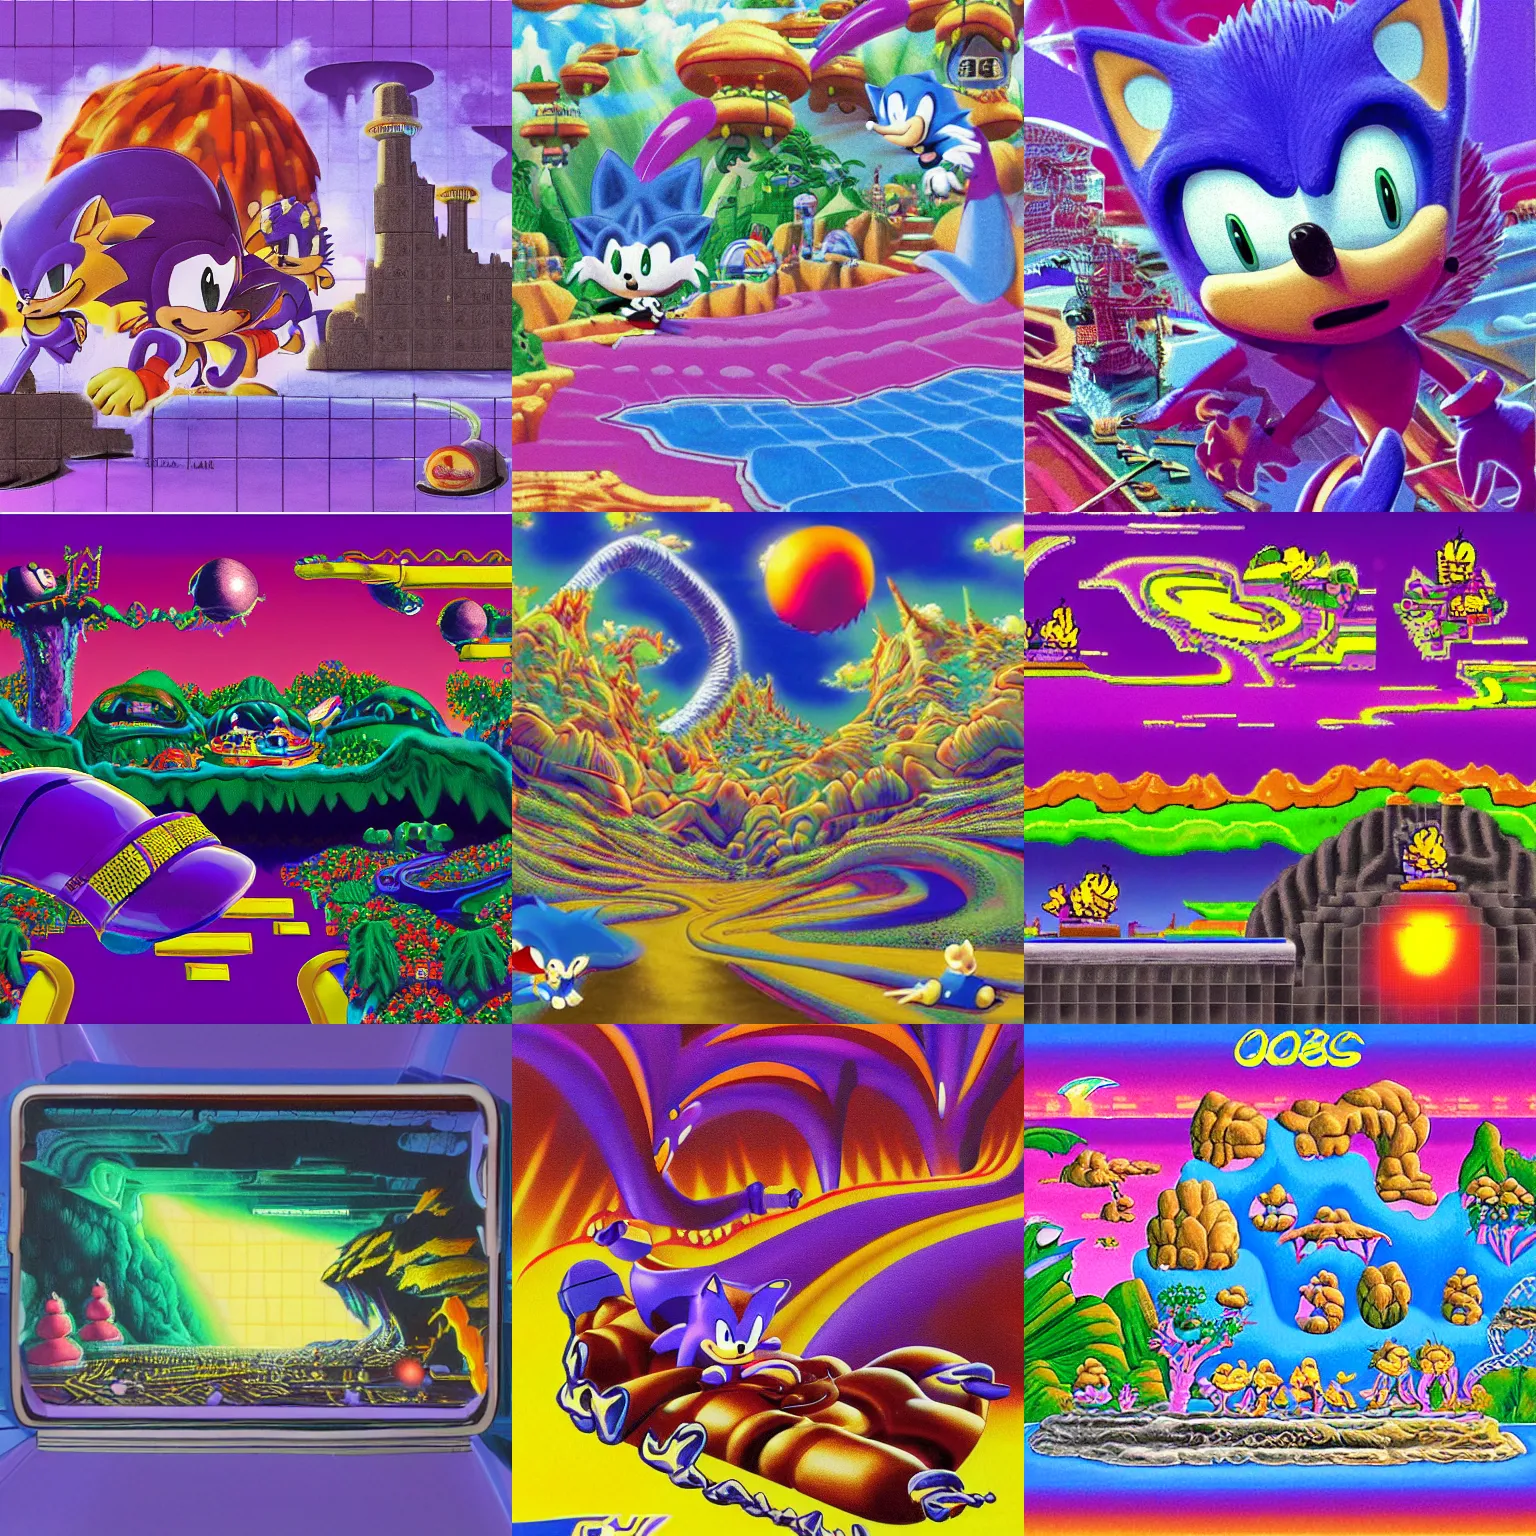 Prompt: sonic hedgehog dreaming of puffy closeup portrait colossal claymation scifi matte painting landscape of a surreal lava, retro moulded professional sonic hedgehog pastels high quality airbrush art tawdry album peaceful of a liquid dissolving airbrush art lsd sonic the hedgehog swimming through cyberspace purple ambiguous checkerboard background 1 9 8 0 s 1 9 8 2 sega genesis video game album